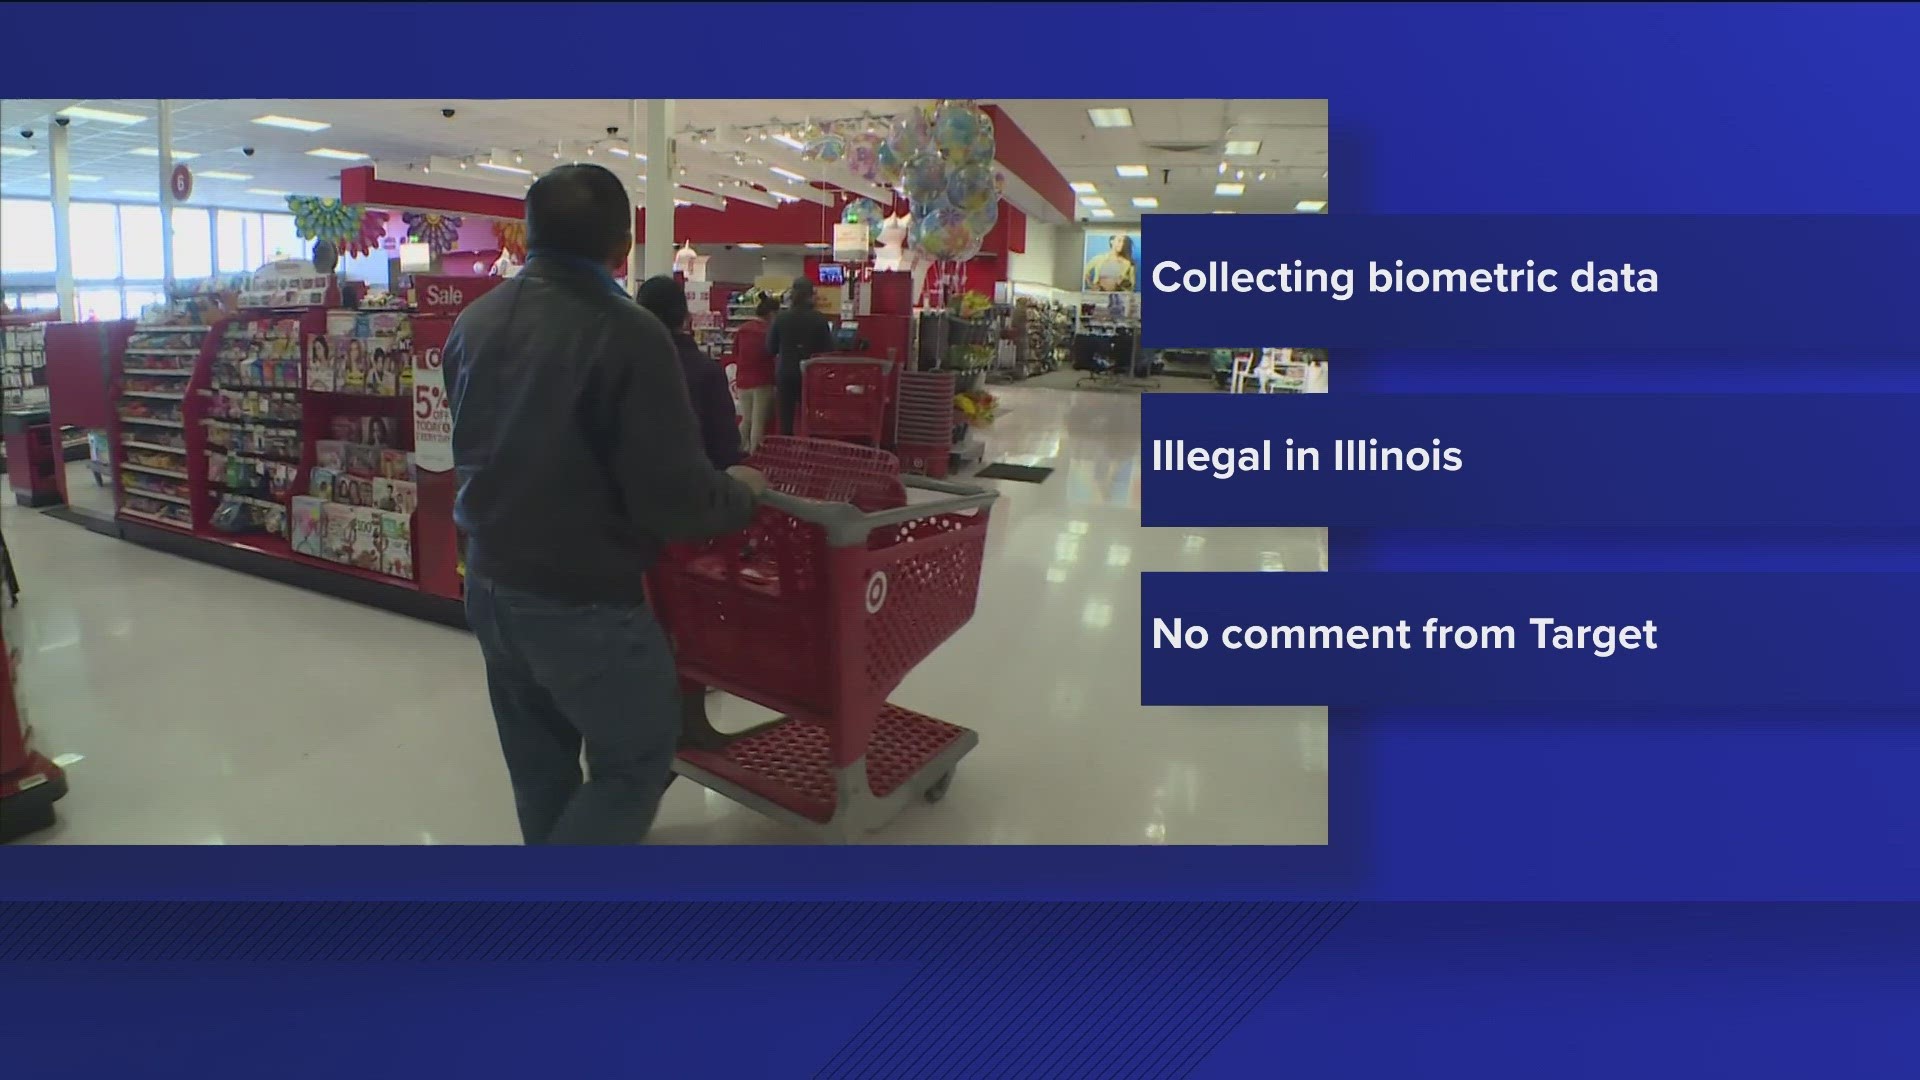 The lawsuit claims target's surveillance systems collect face and fingerprint scans without shoppers' knowledge, which is illegal in the state of Illinois.